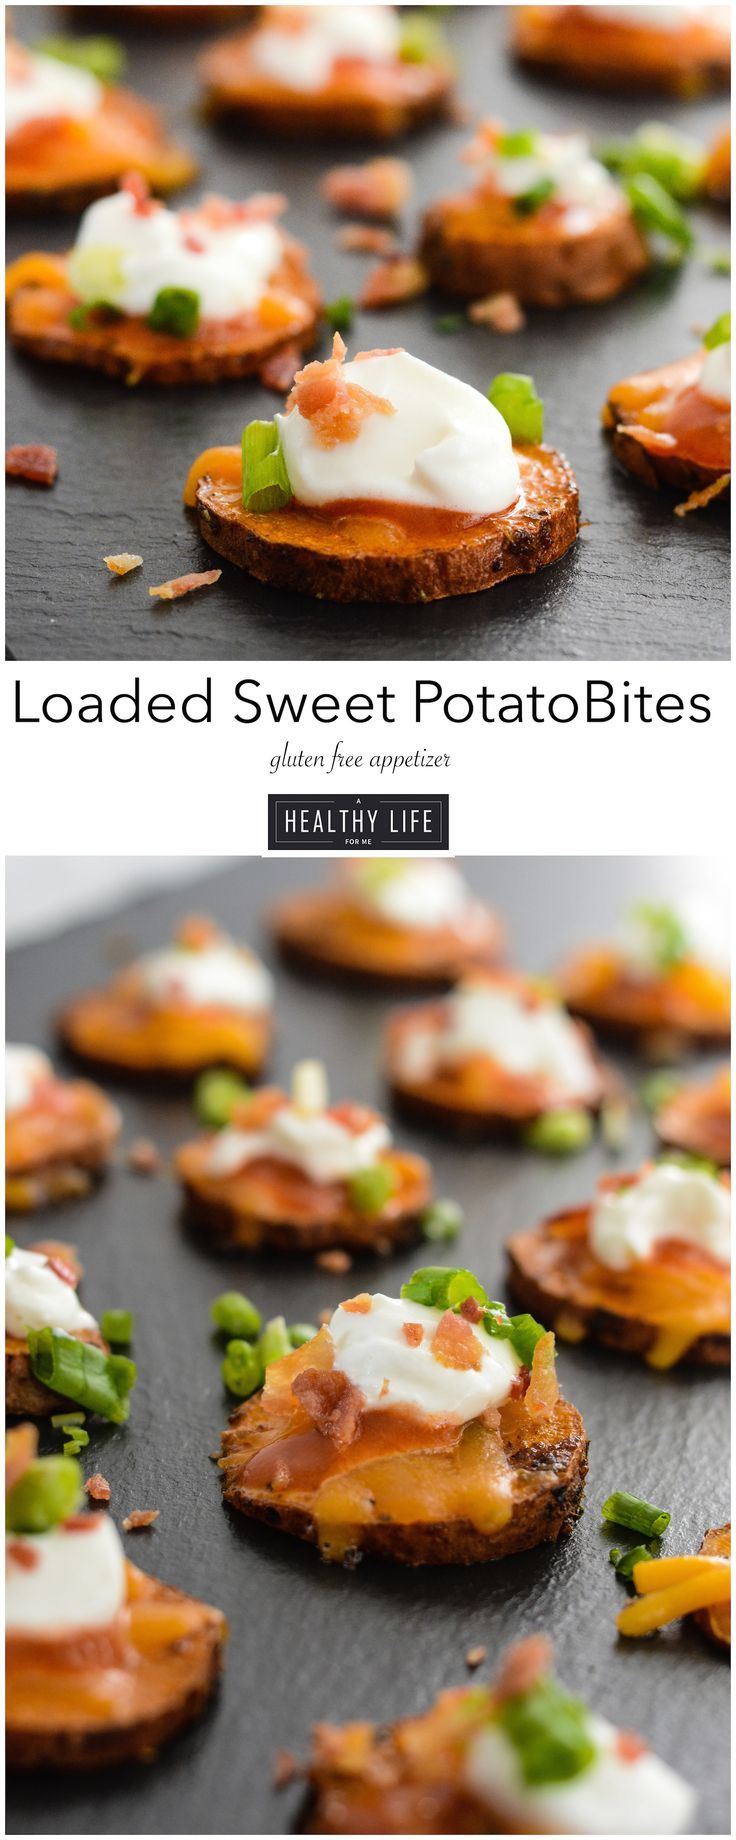 Healthy Thanksgiving Appetizers Easy
 17 Best ideas about Thanksgiving Appetizers on Pinterest